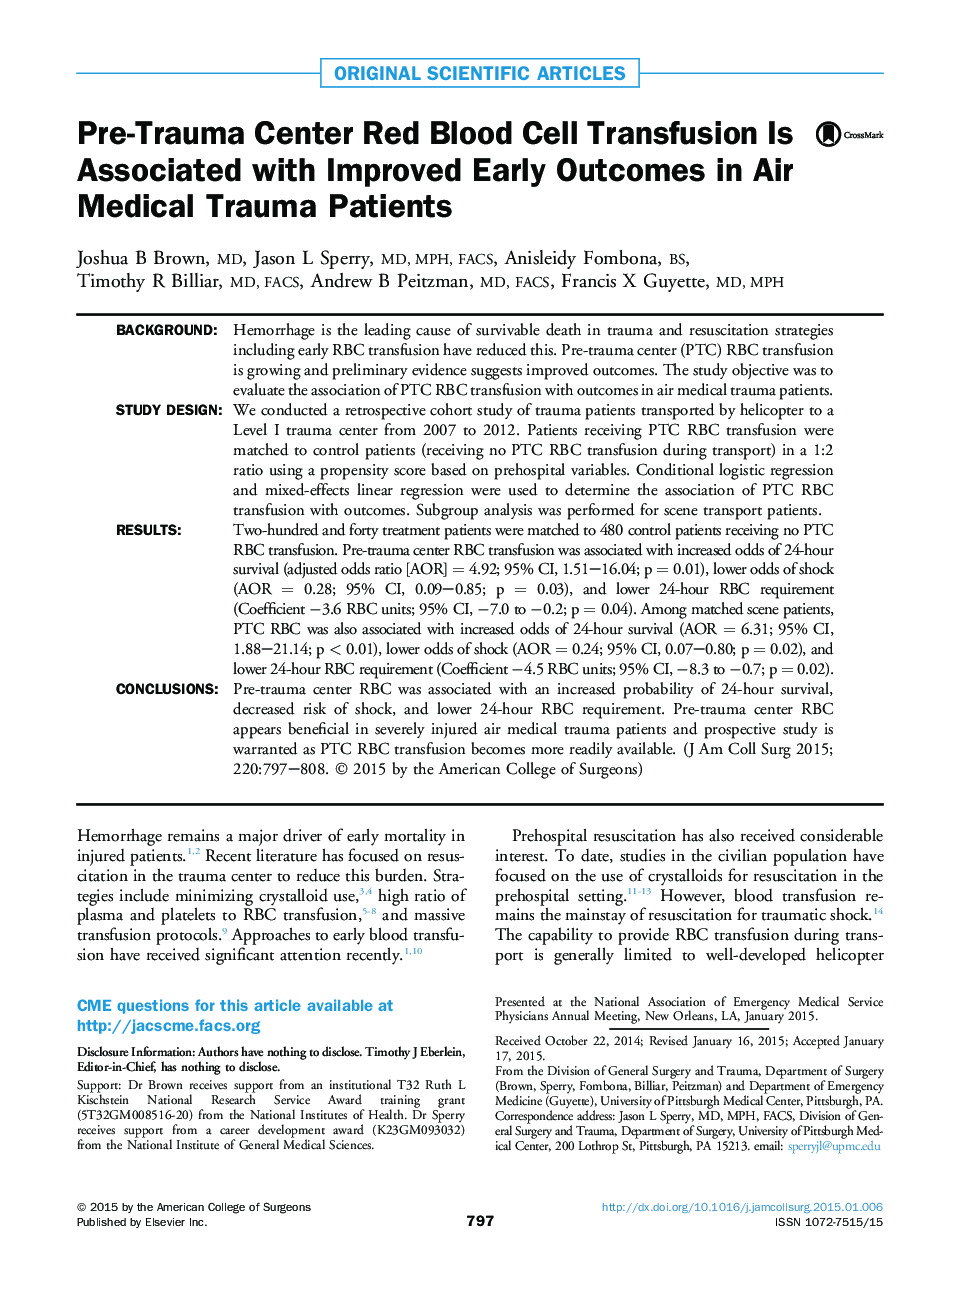 Pre-Trauma Center Red Blood Cell Transfusion Is Associated with Improved Early Outcomes in Air Medical Trauma Patients 